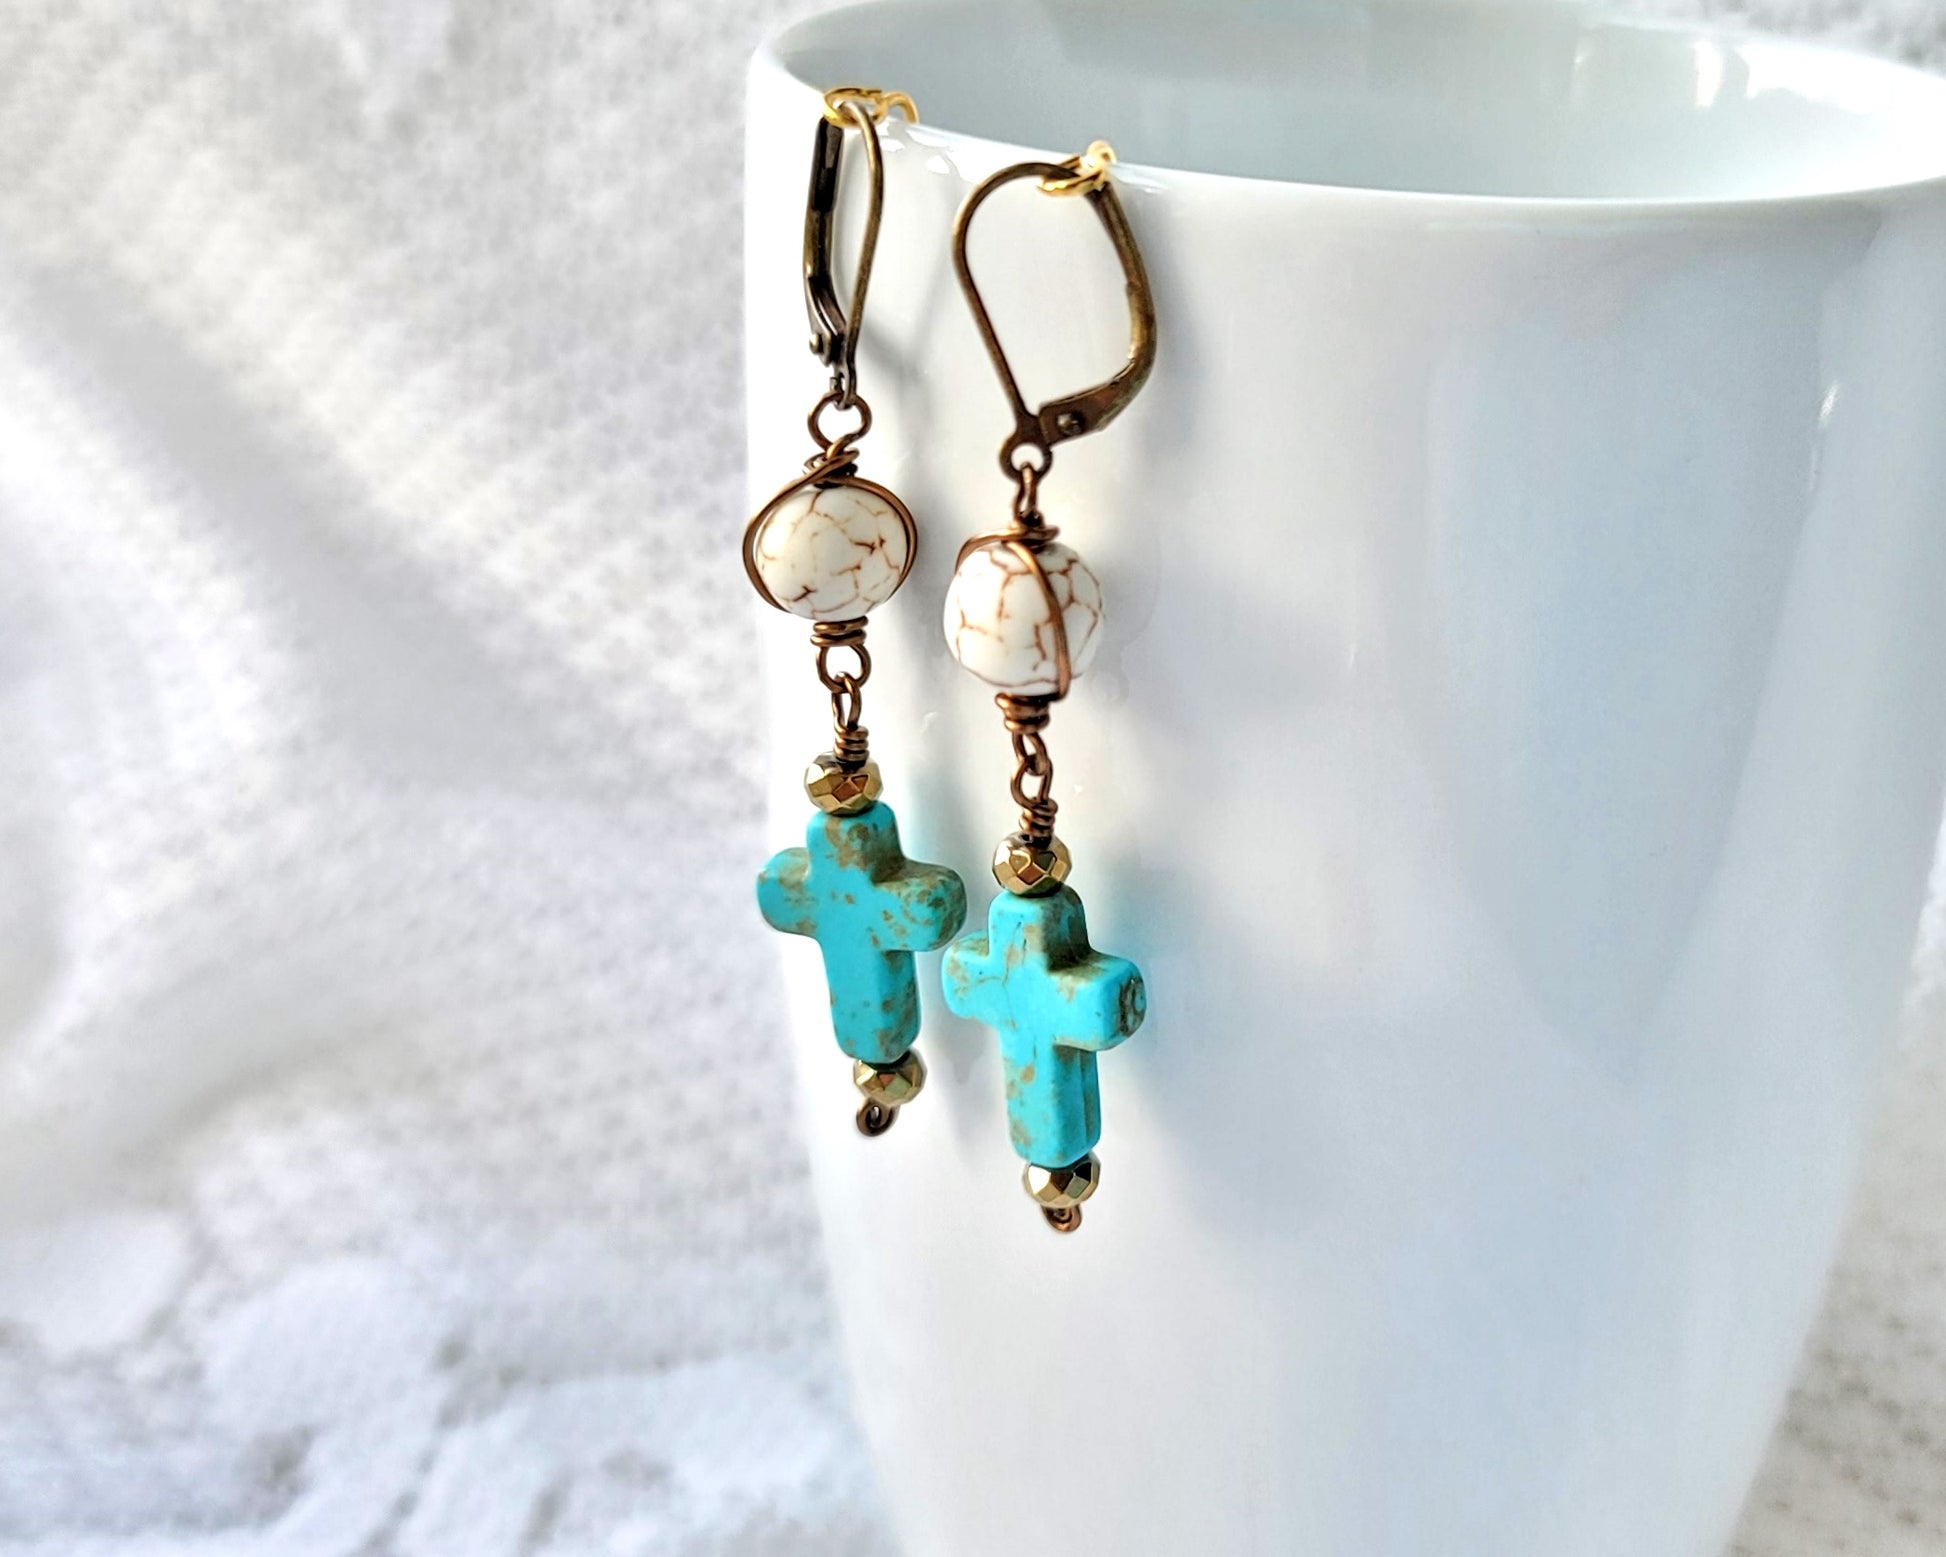 Long Boho Turquoise Cross Earrings, wire wrapped turquoise cross, white howlite and gold hematite beads